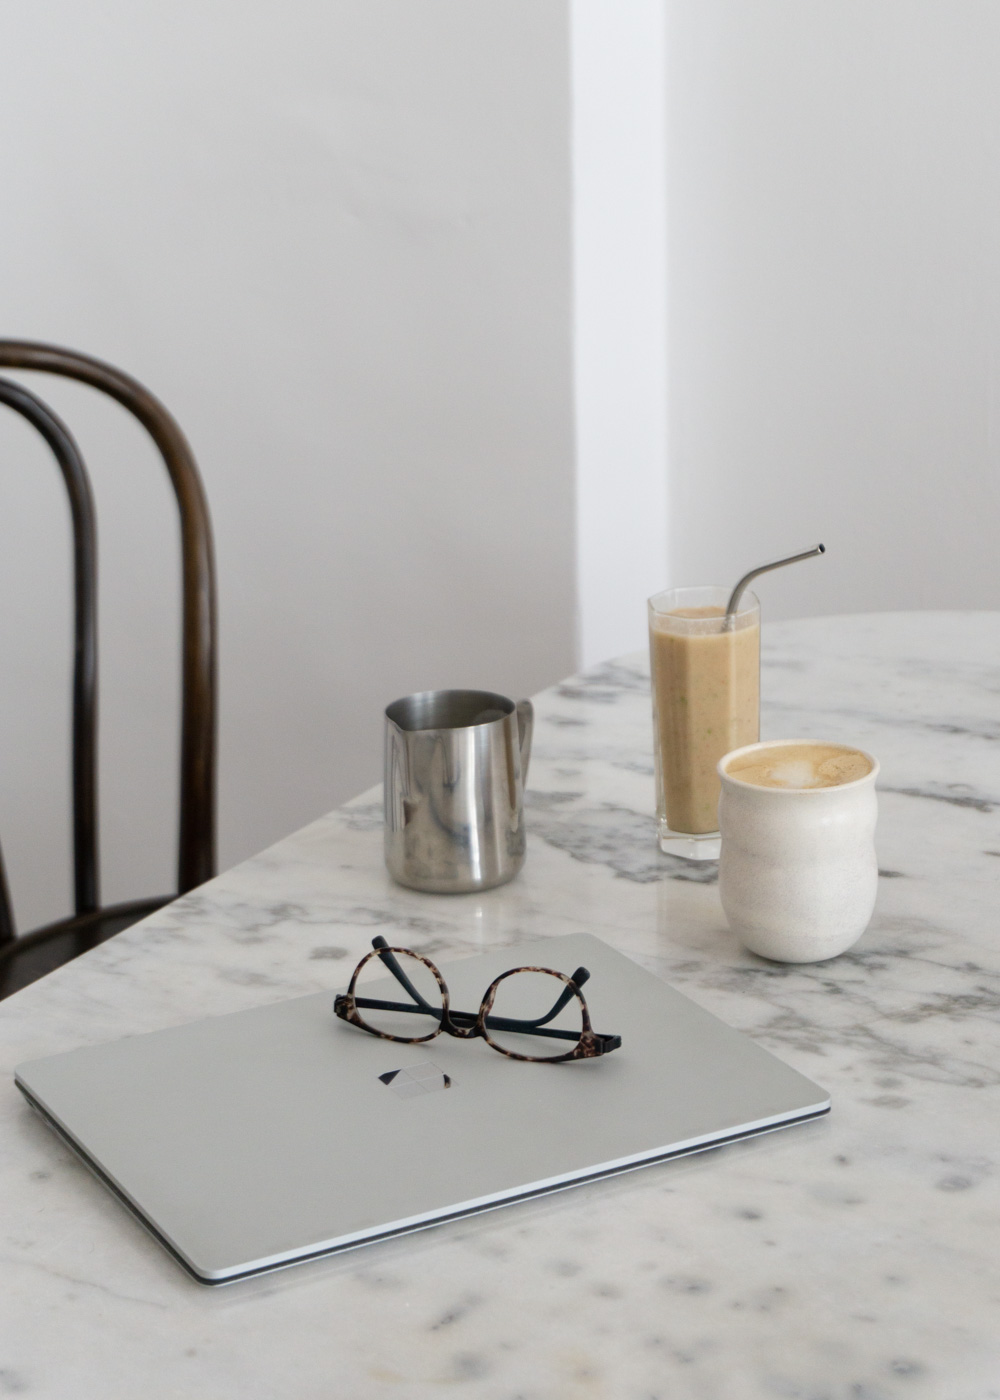 Working From Home - 5 Tips For Enjoying Home Office / RG Daily Blog - Interior